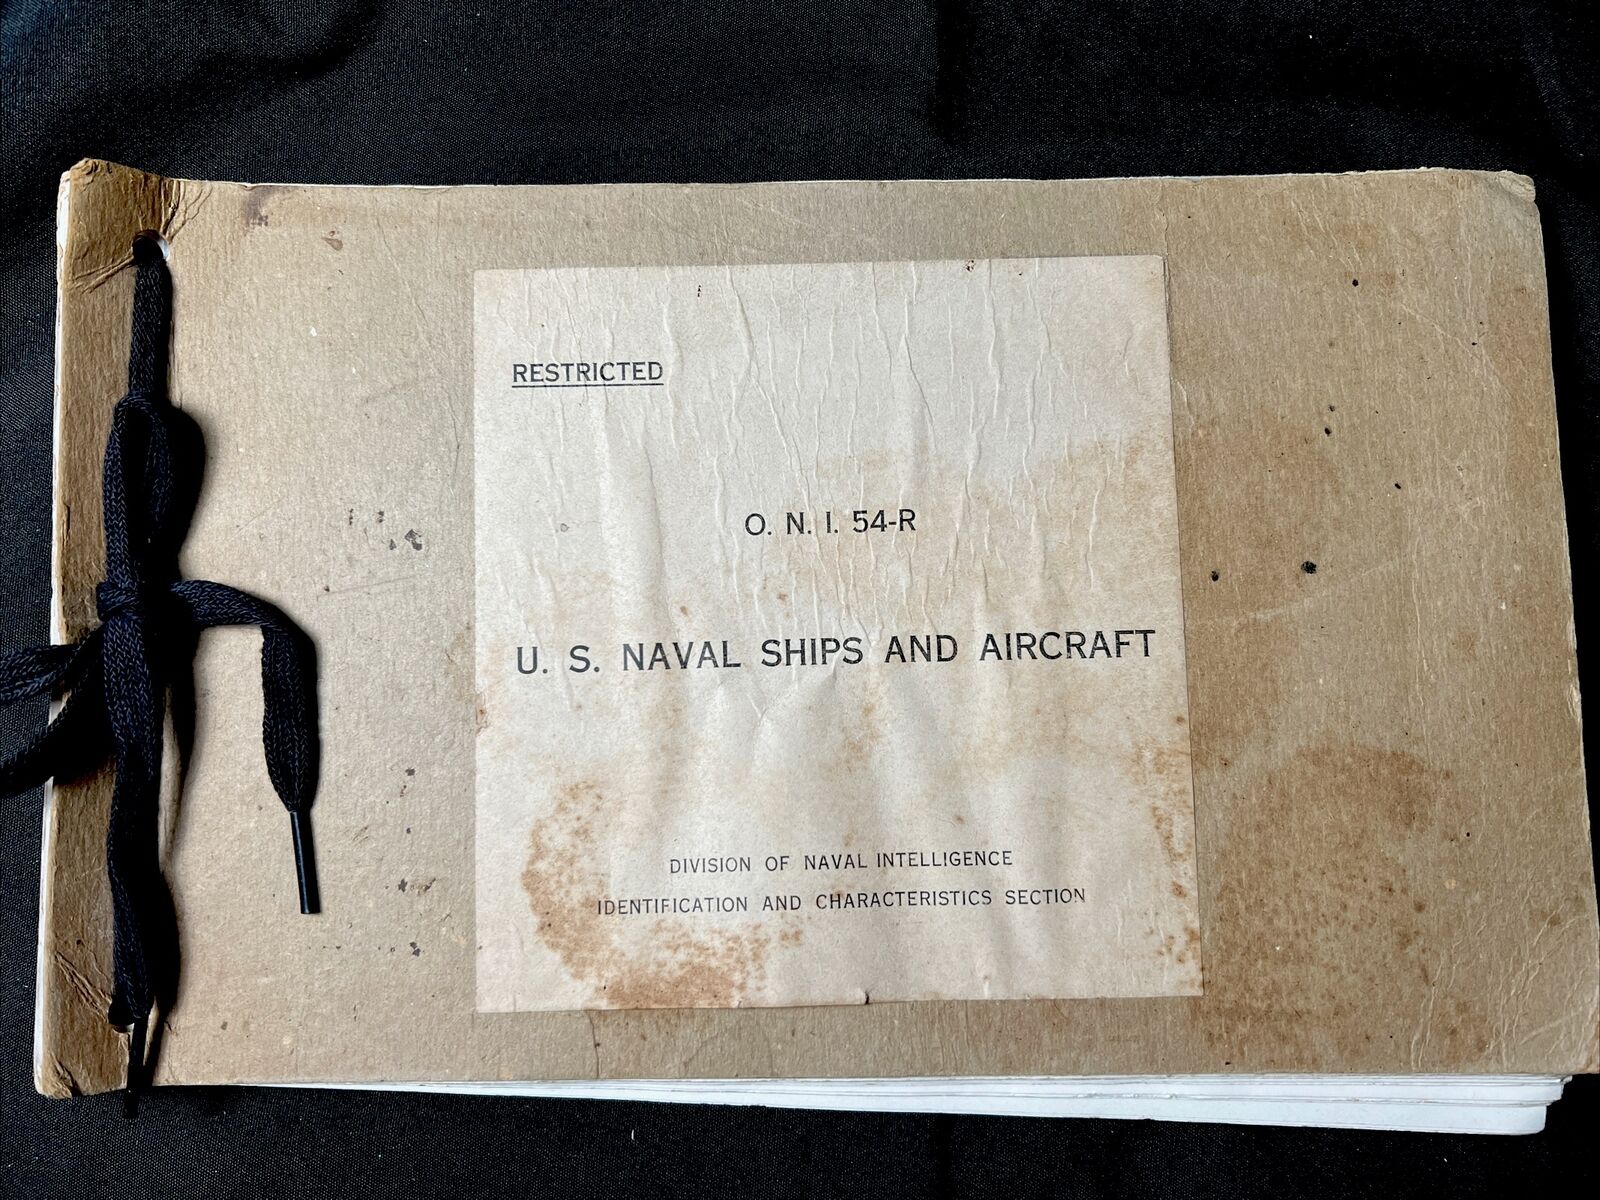 1942 O.N.I. 54-R U.S. NAVAL SHIPS and AIRCRAFT Book ID Section MILITARY PHOTOS